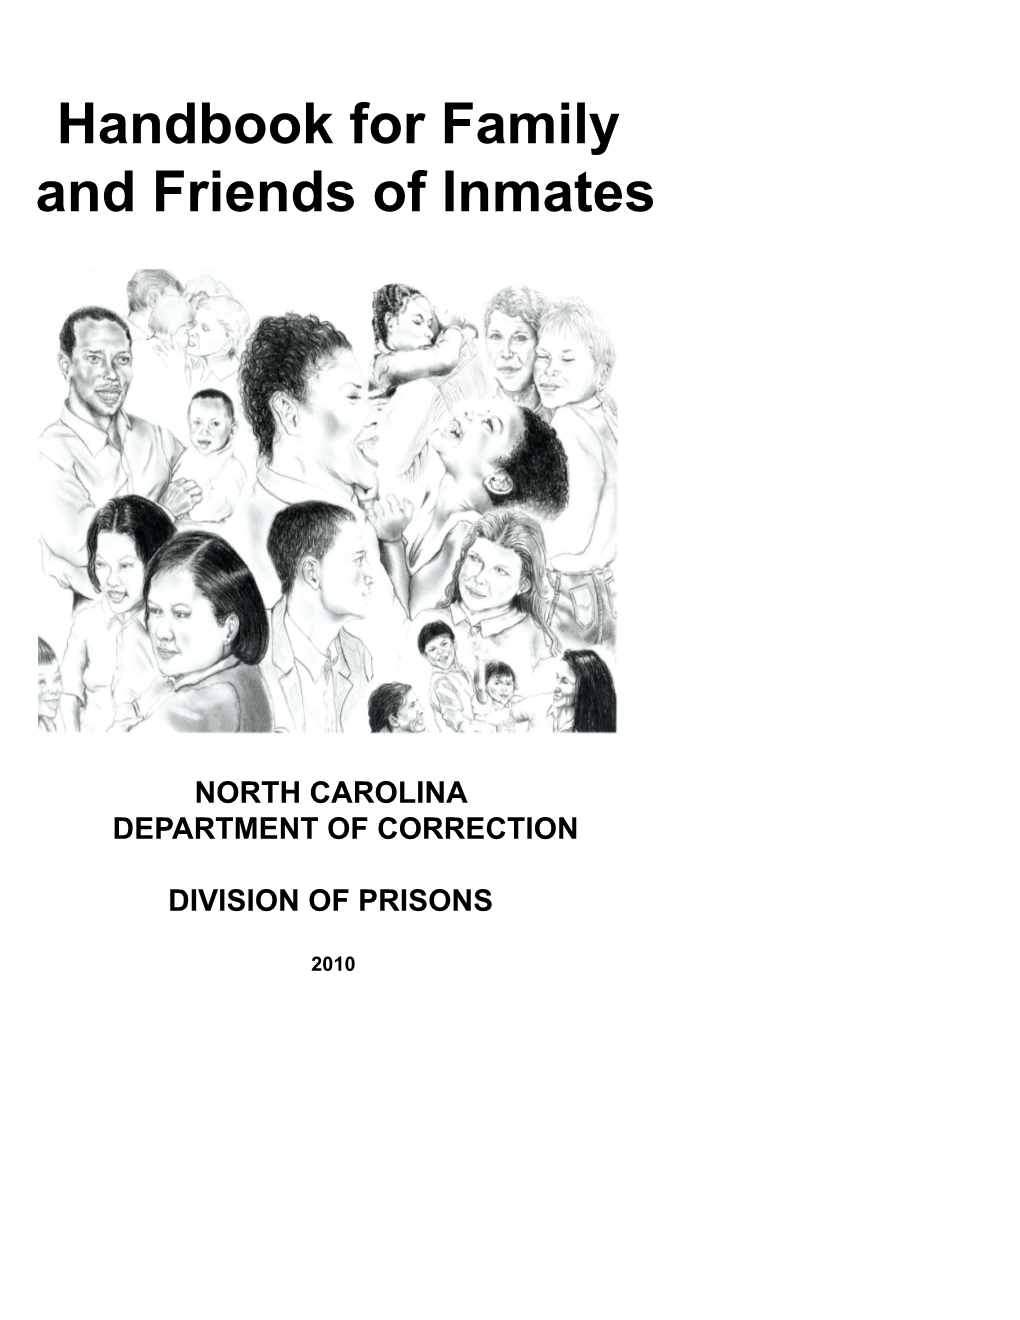 Handbook for Family and Friends of Inmates